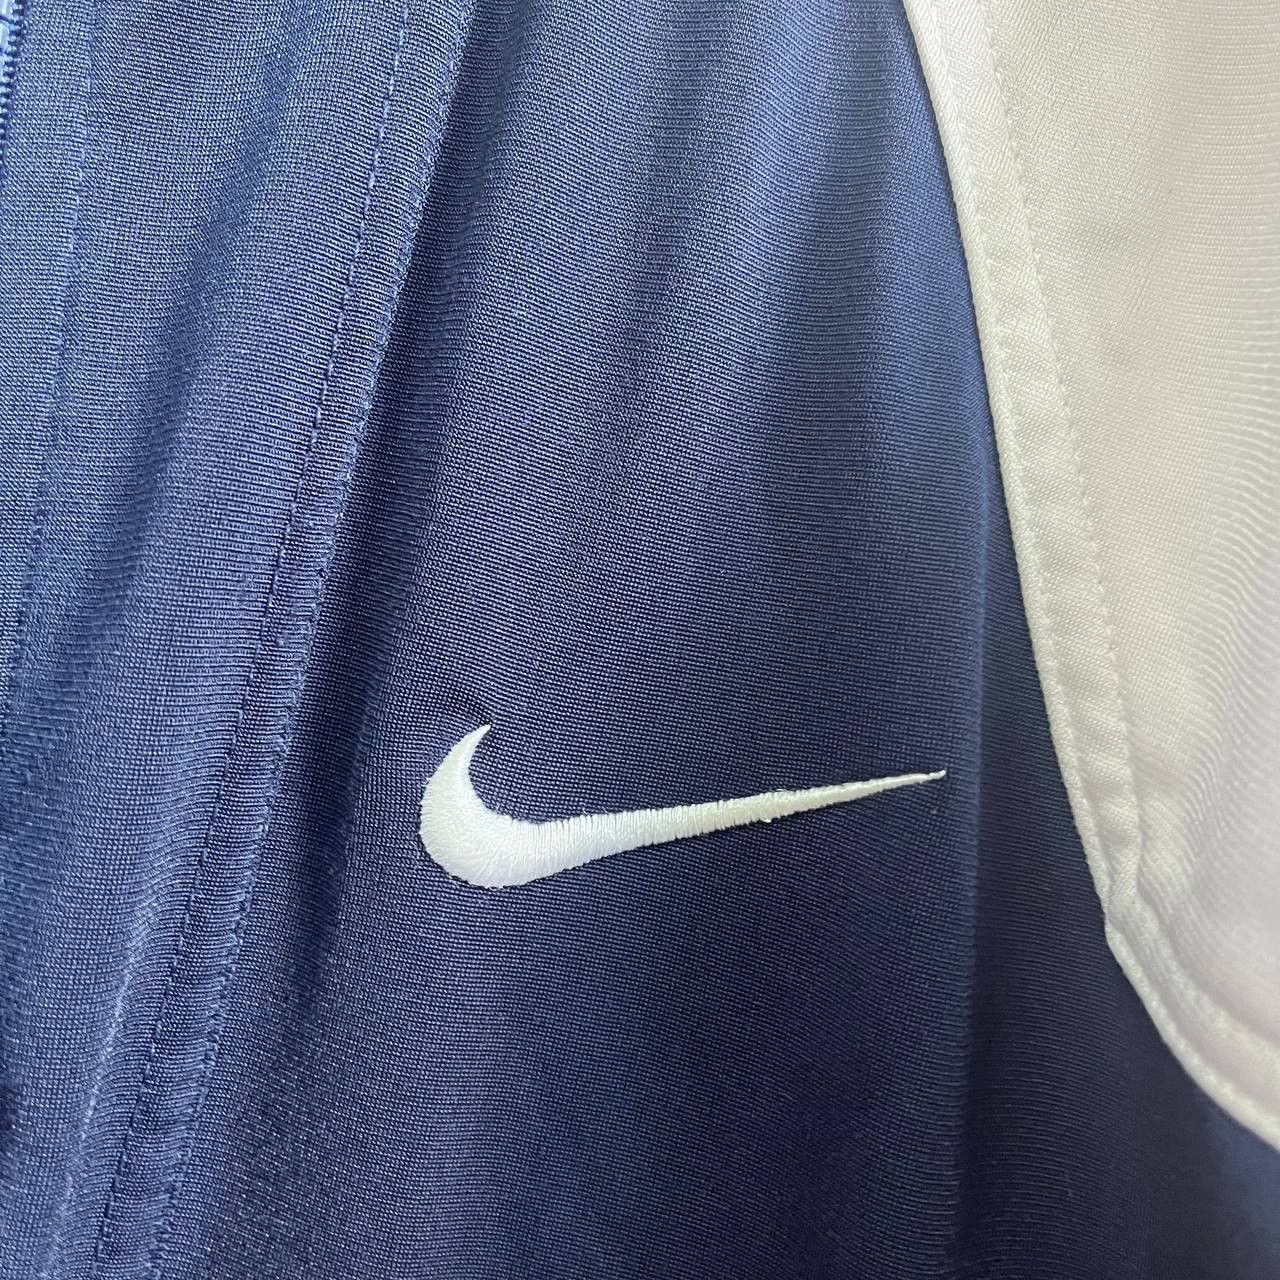 Vintage Nike Tracktop Made In USA - 5